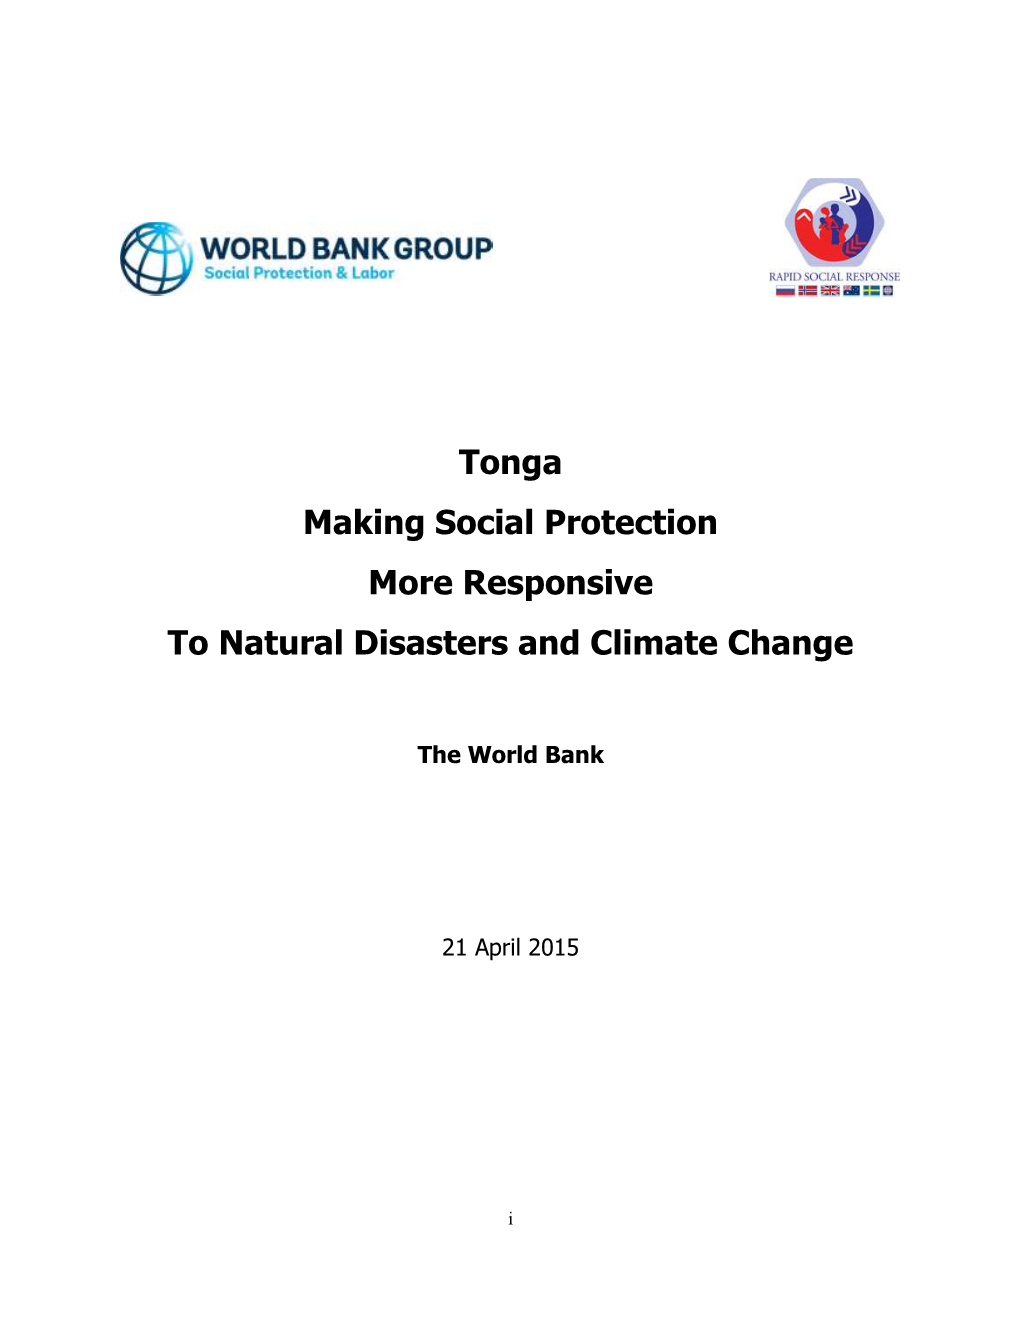 Tonga Making Social Protection More Responsive to Natural Disasters and Climate Change